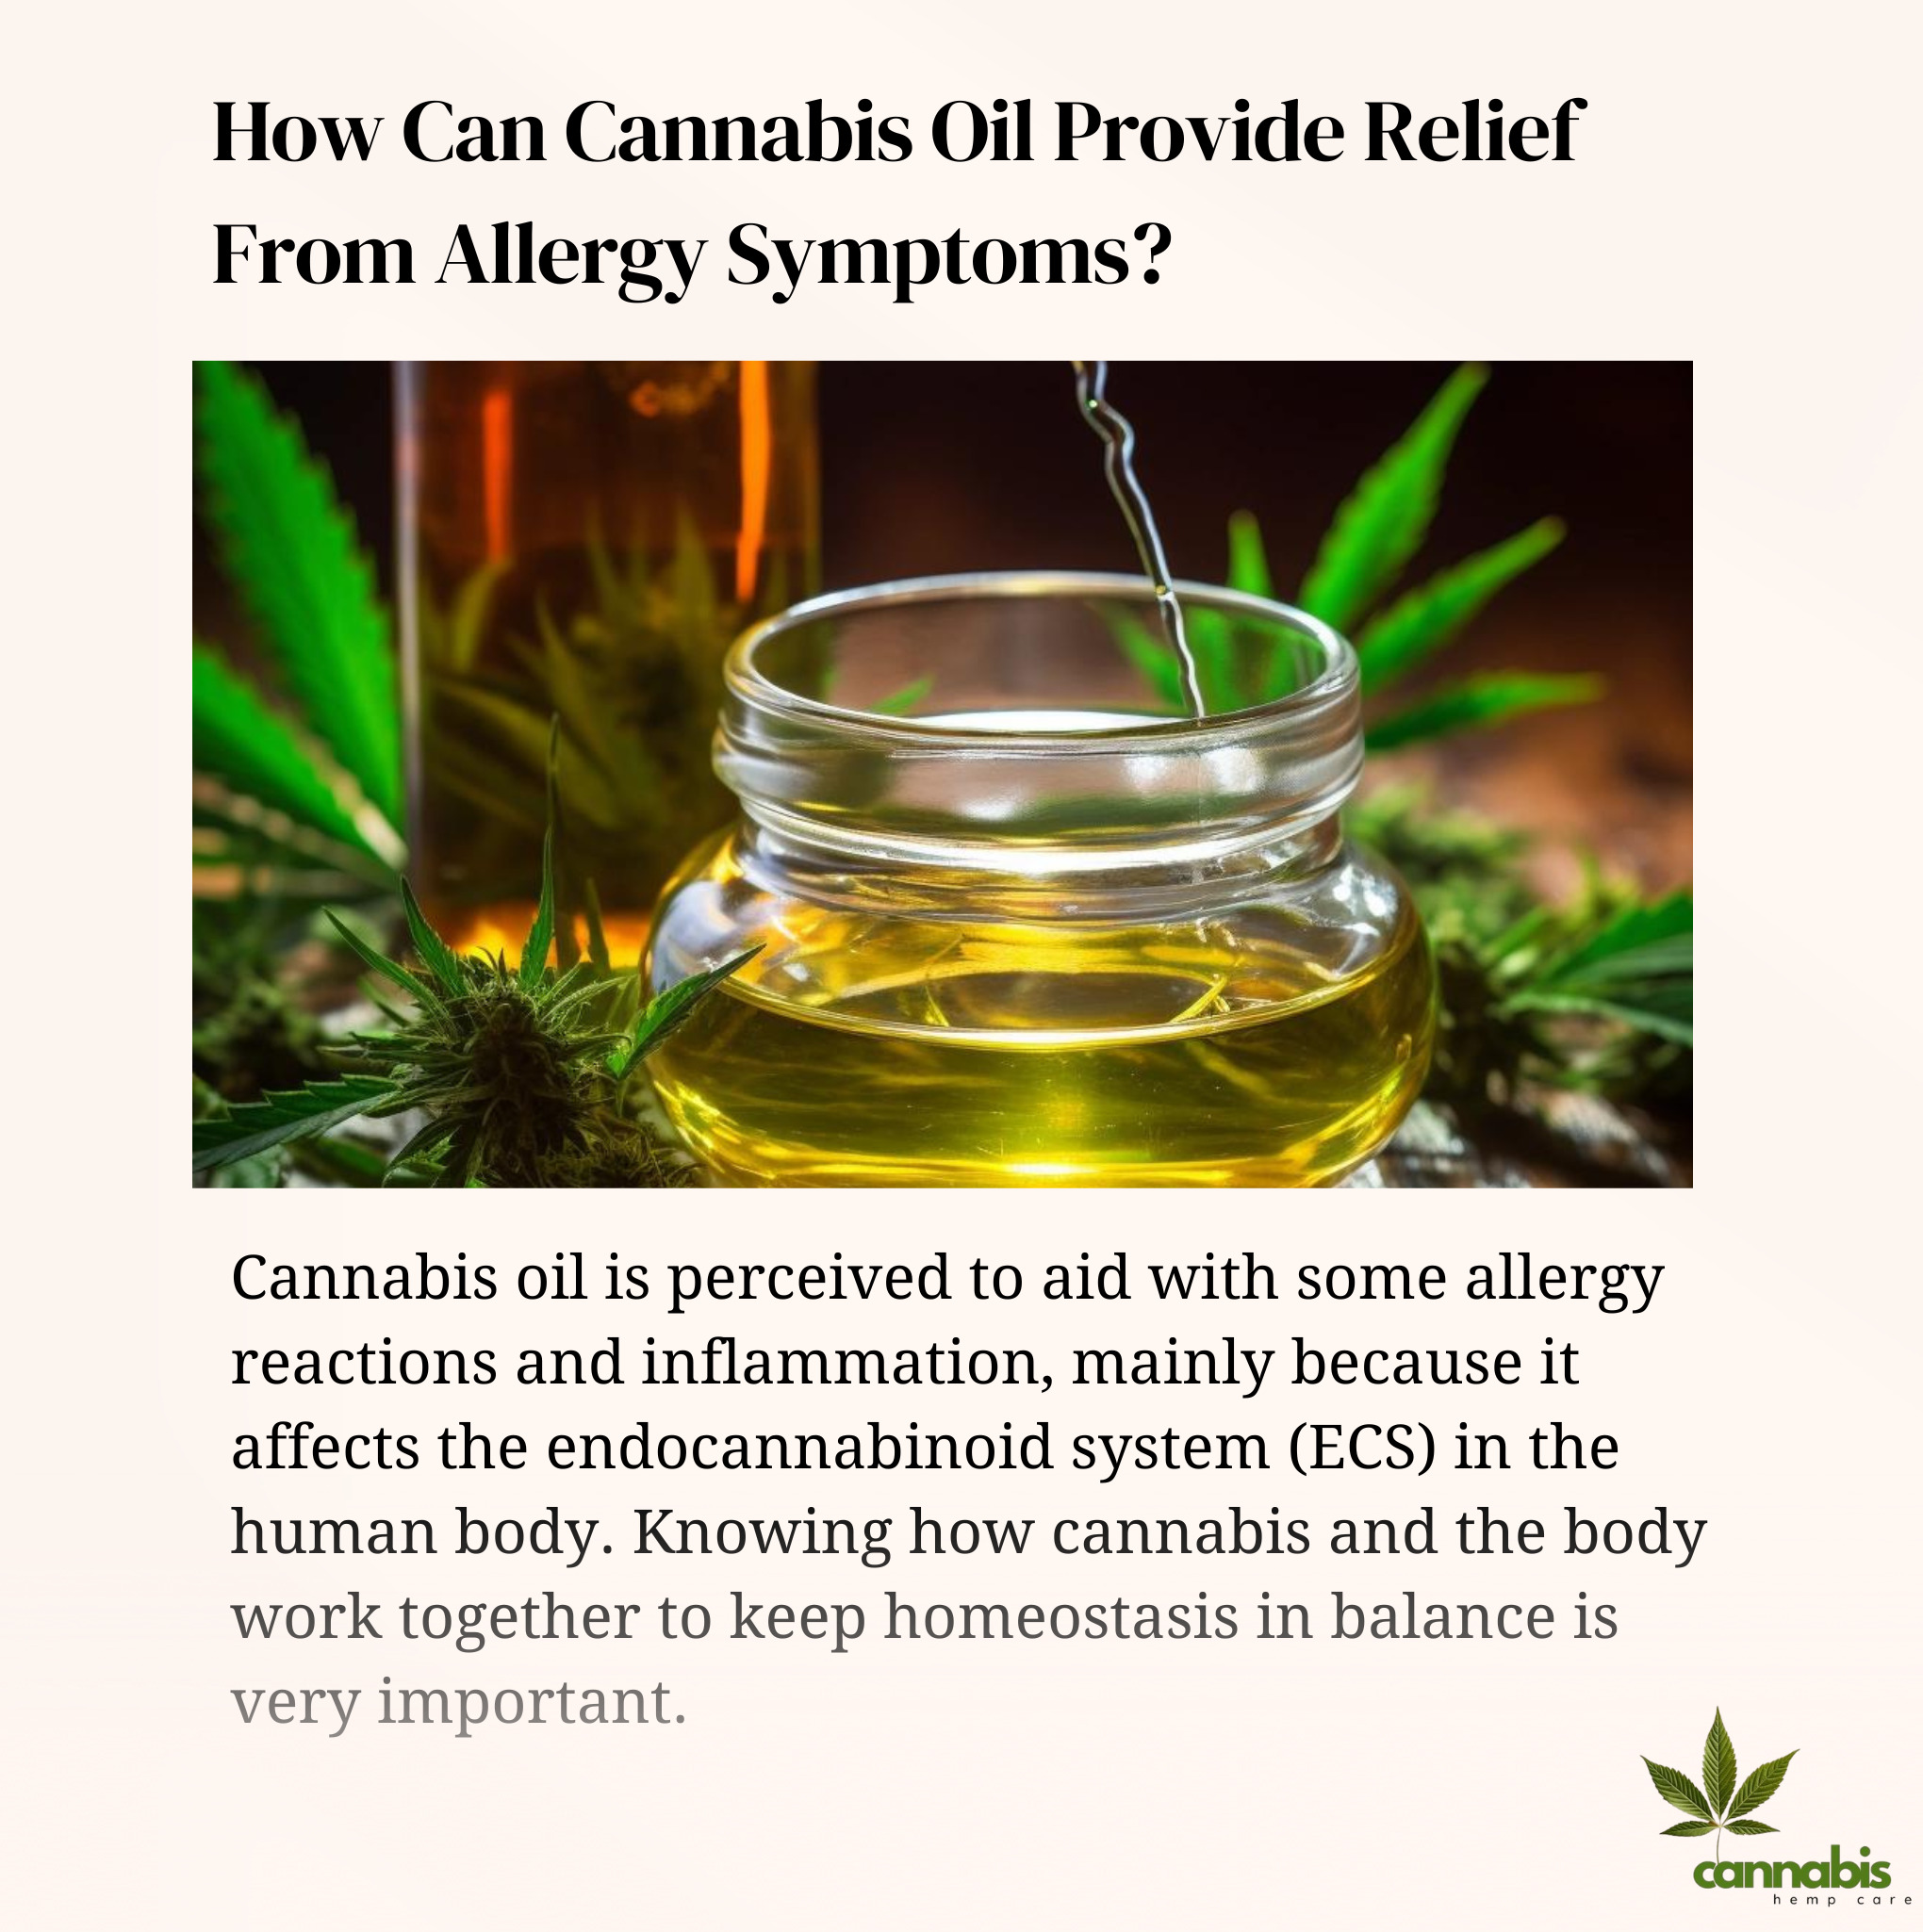 How Can Cannabis Oil Provide Relief From Allergy Symptoms?